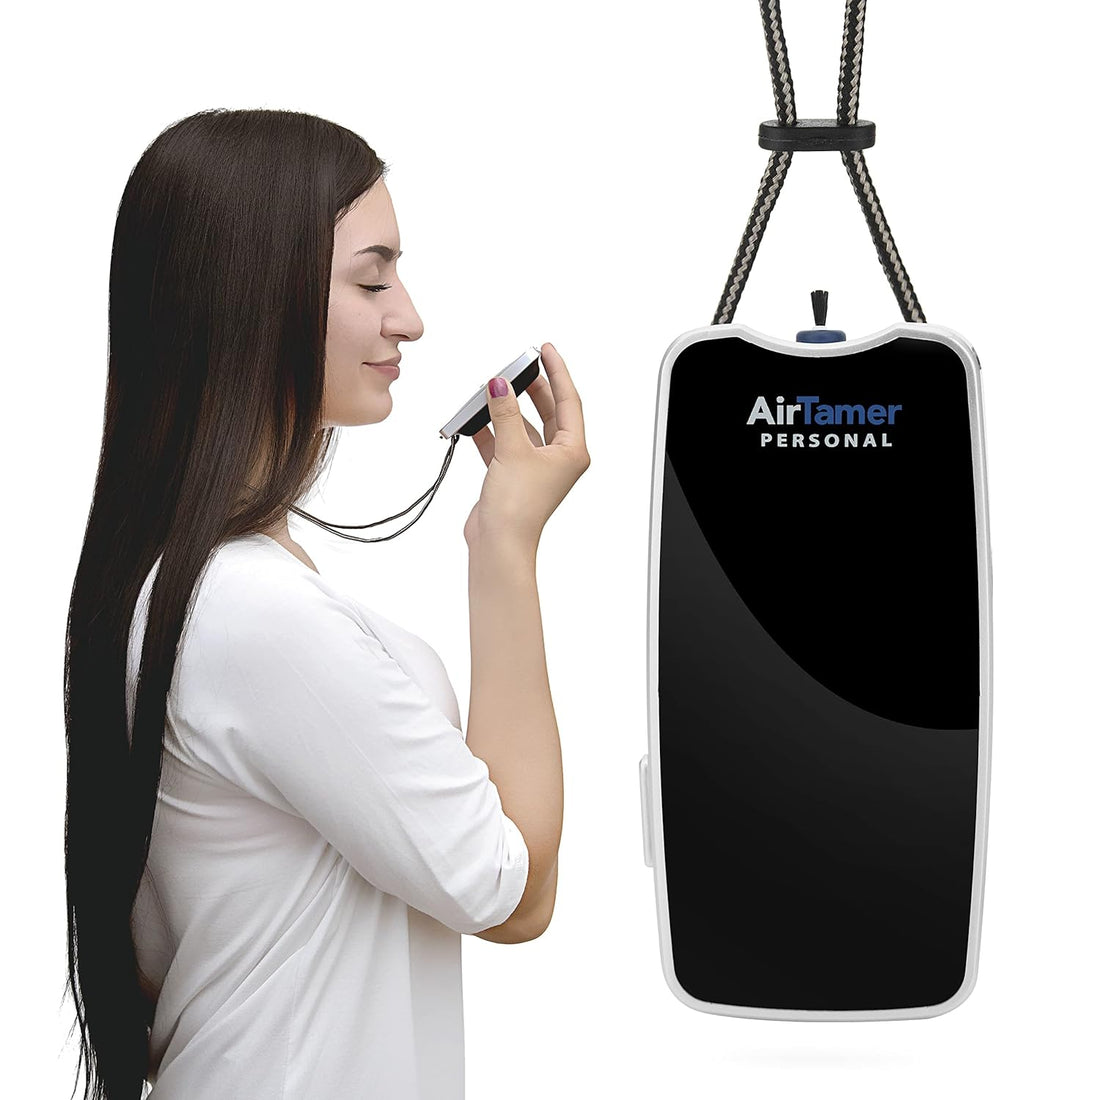 AirTamer Rechargeable Personal Air Purifier: Black, Leatherette Pouch, Plastic Packaging by AirTamer